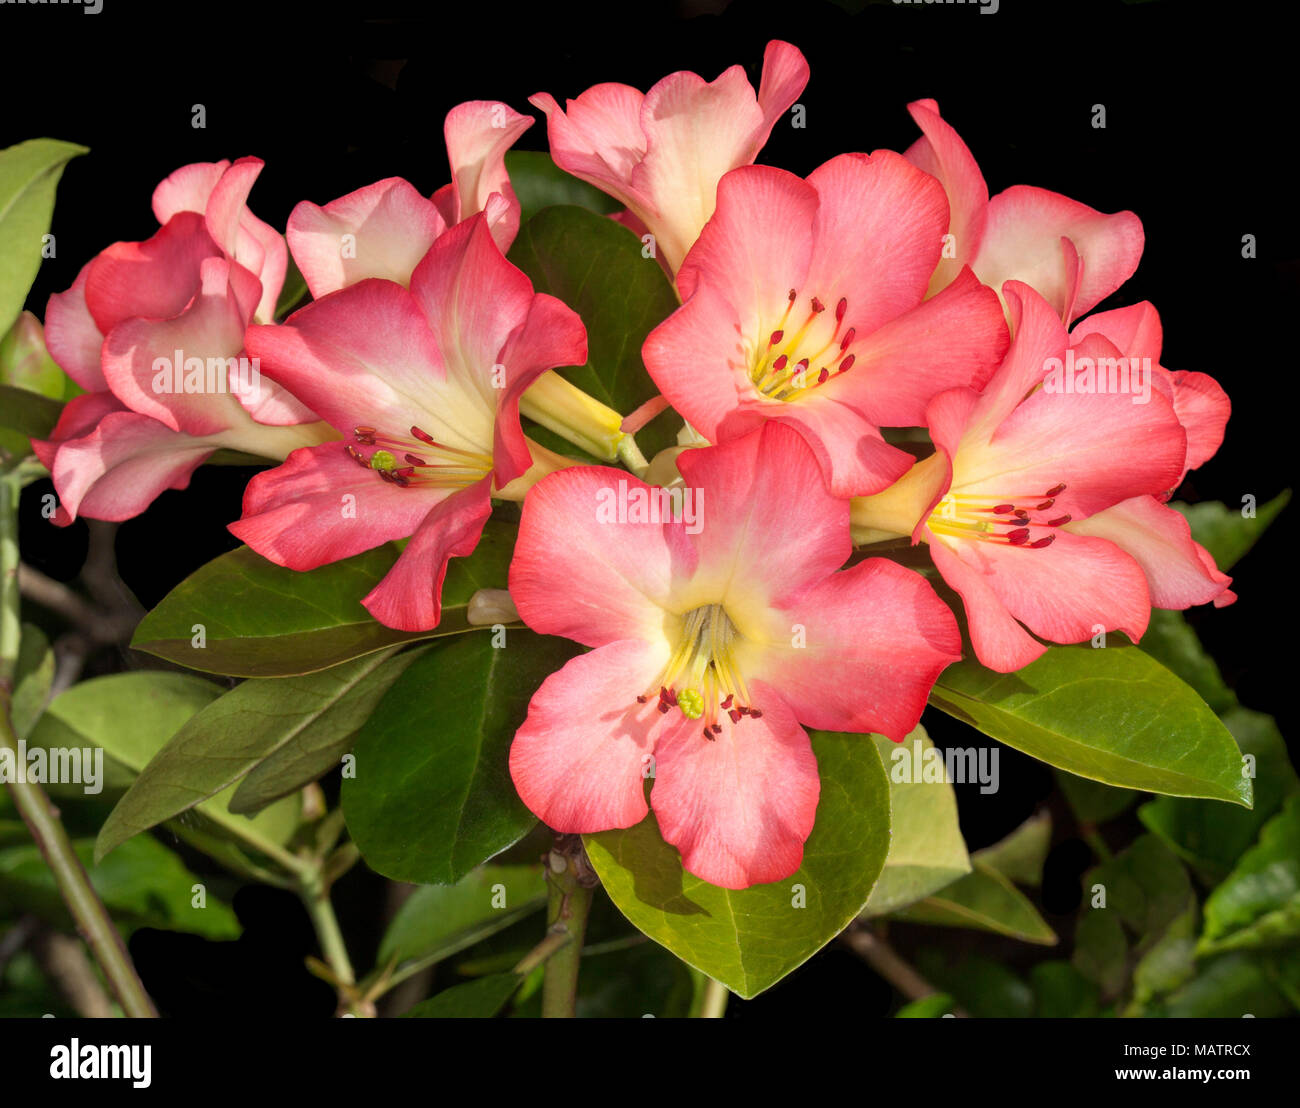 Cluster of large and stunning vivid pink flowers & green leaves of tropical Vireya Rhododendron 'Strawberry Parfait' on dark background in Australia Stock Photo